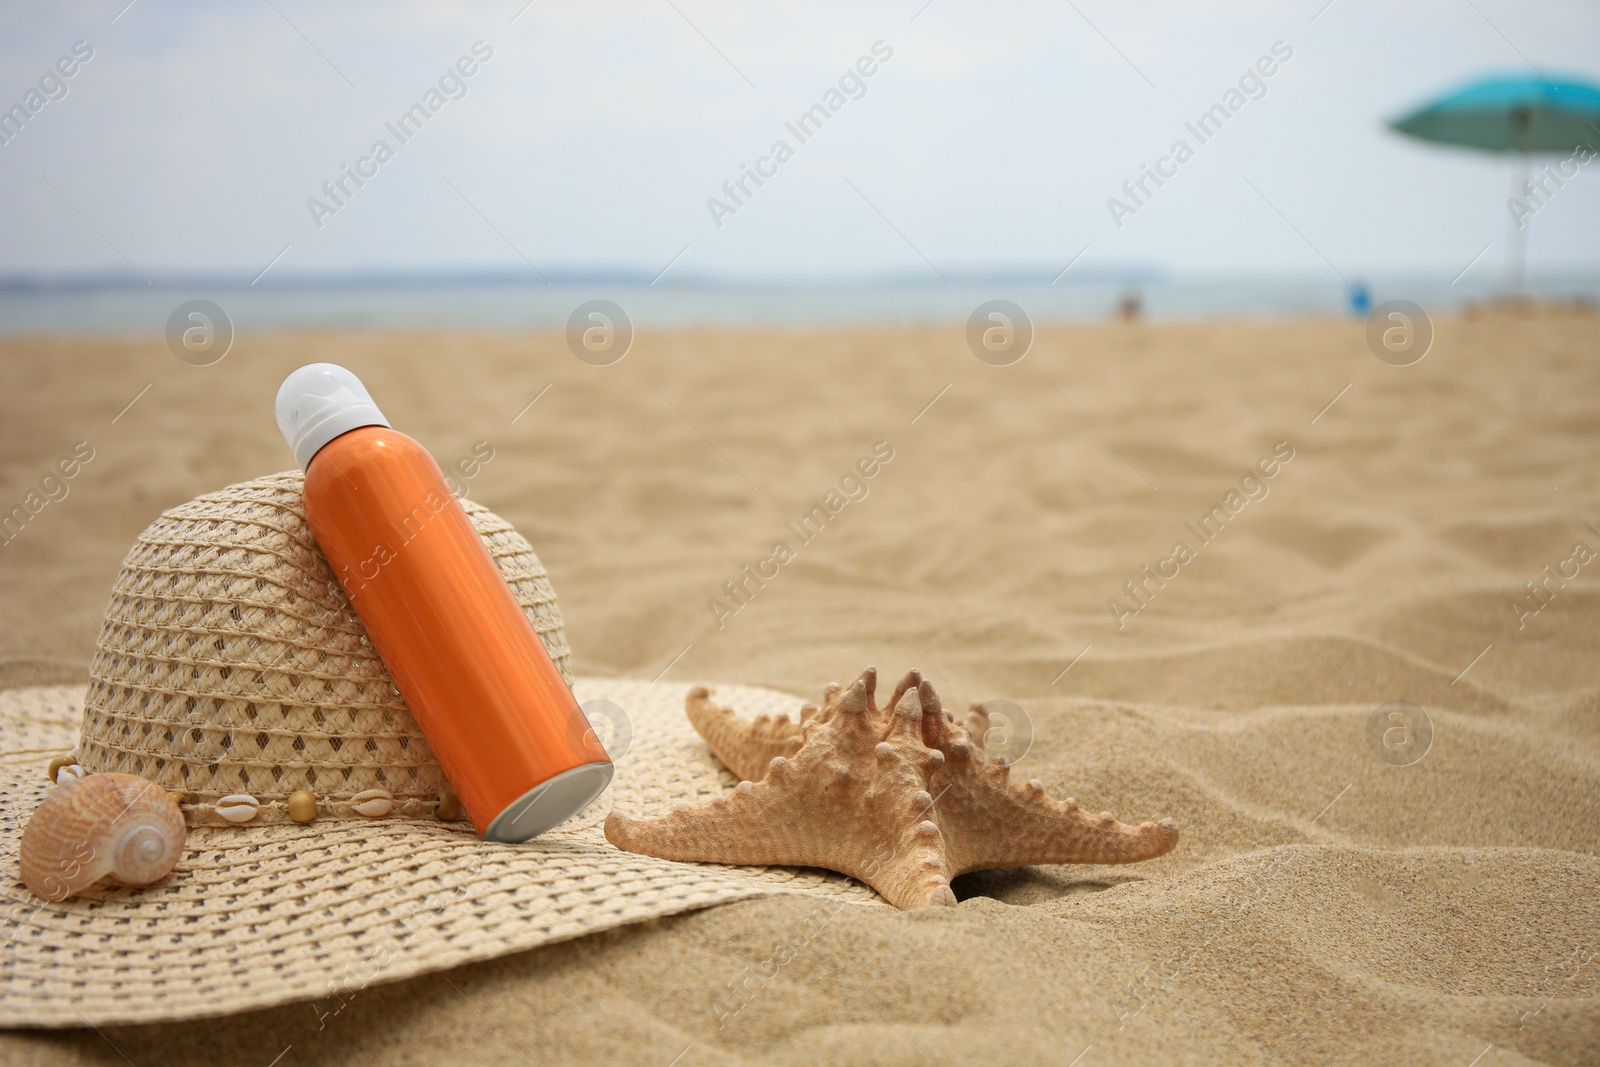 Photo of Sunscreen, hat and starfish on sand, space for text. Sun protection care